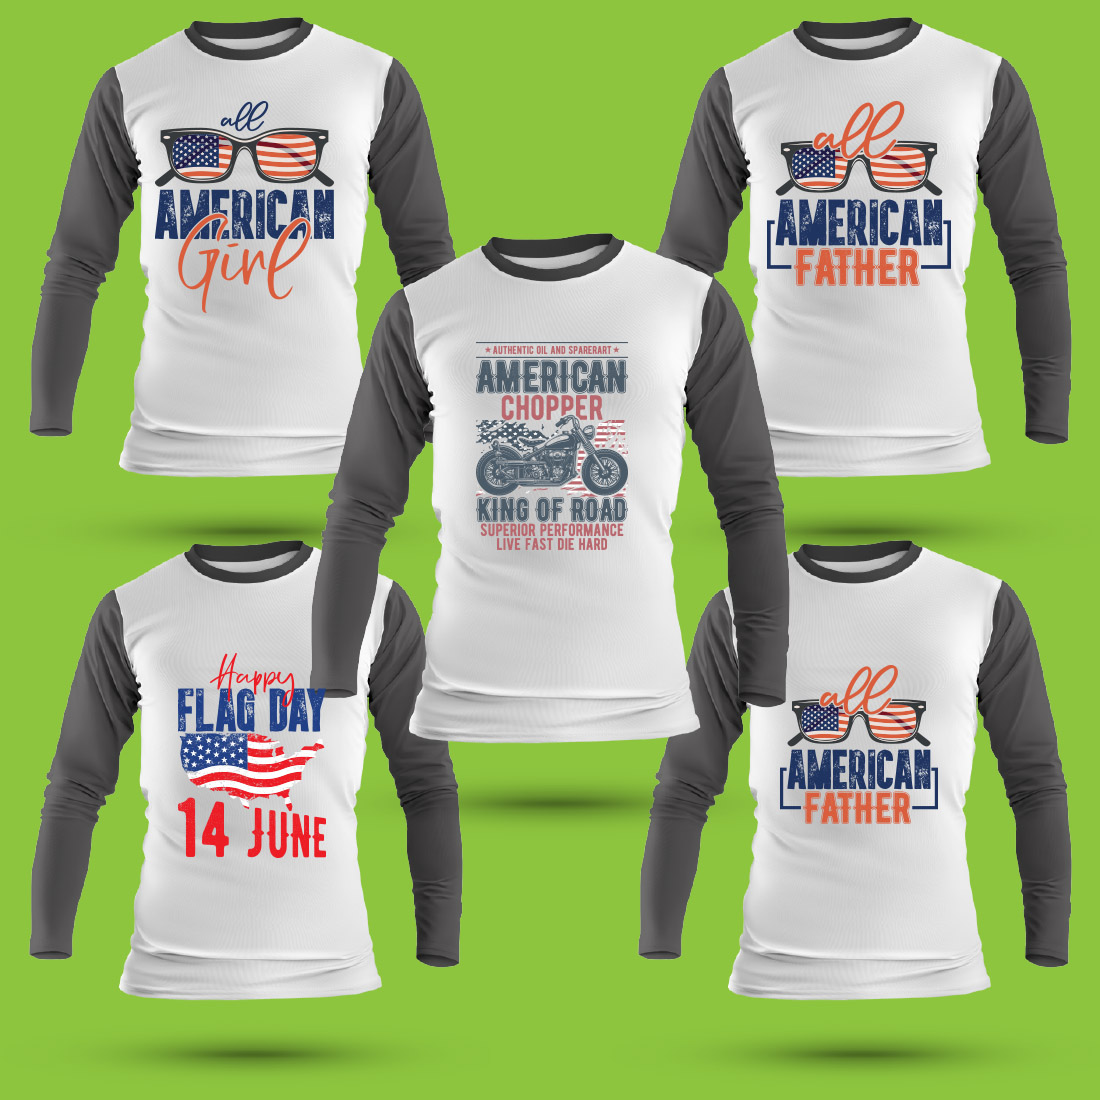 Group of three shirts with the american flag on them.